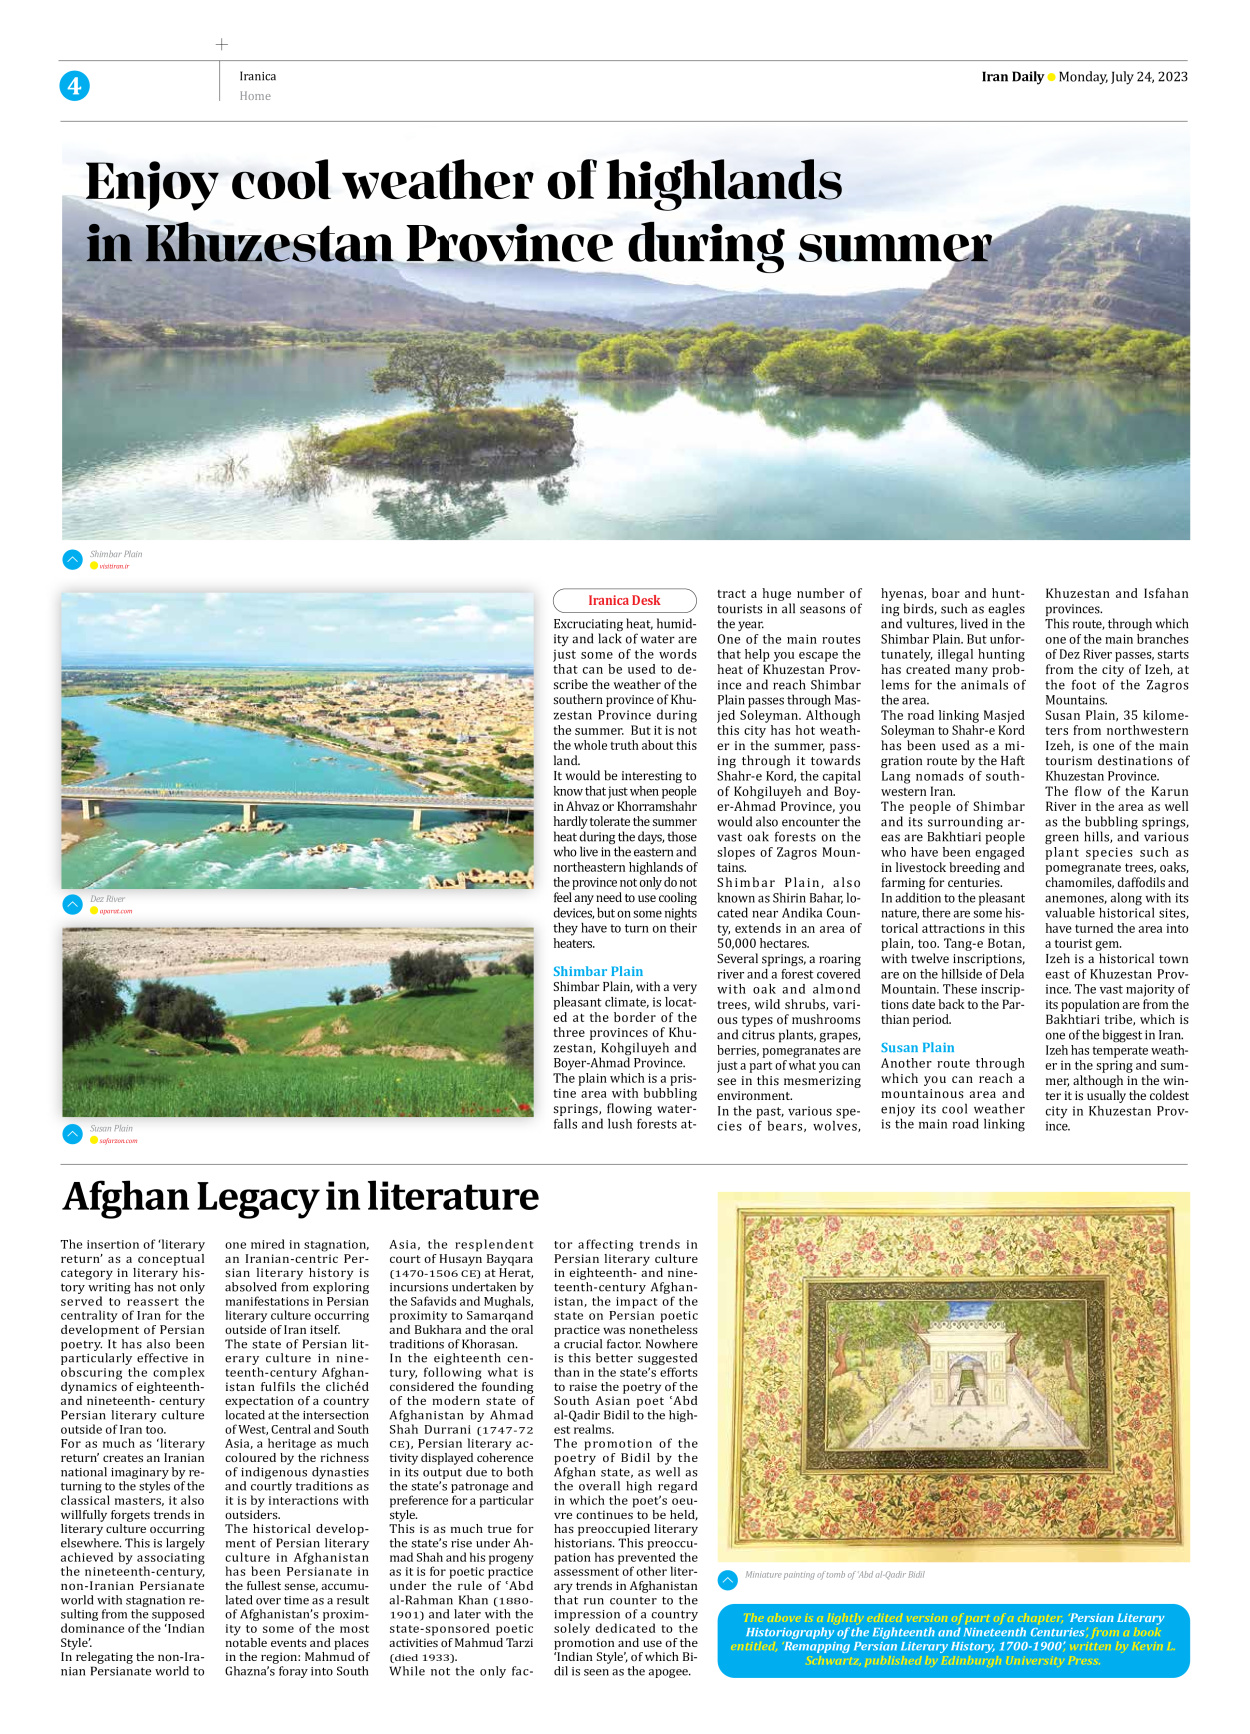 Iran Daily - Number Seven Thousand Three Hundred and Forty Seven - 24 July 2023 - Page 4